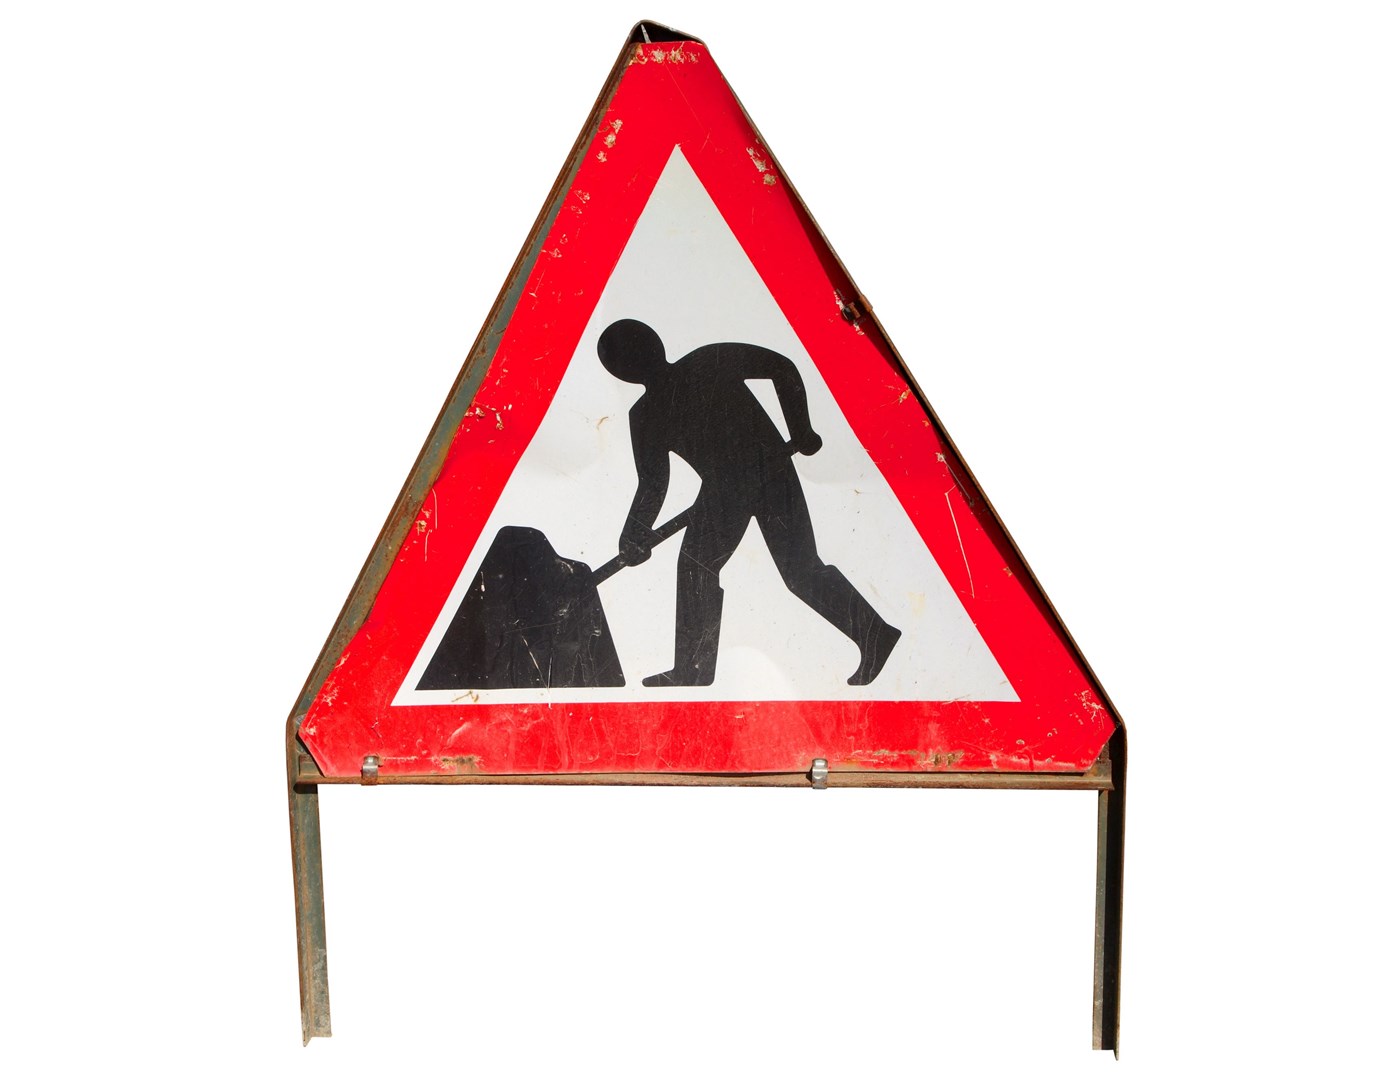 Roadworks will start this Monday on the A9 at the entrance to the Highlands.